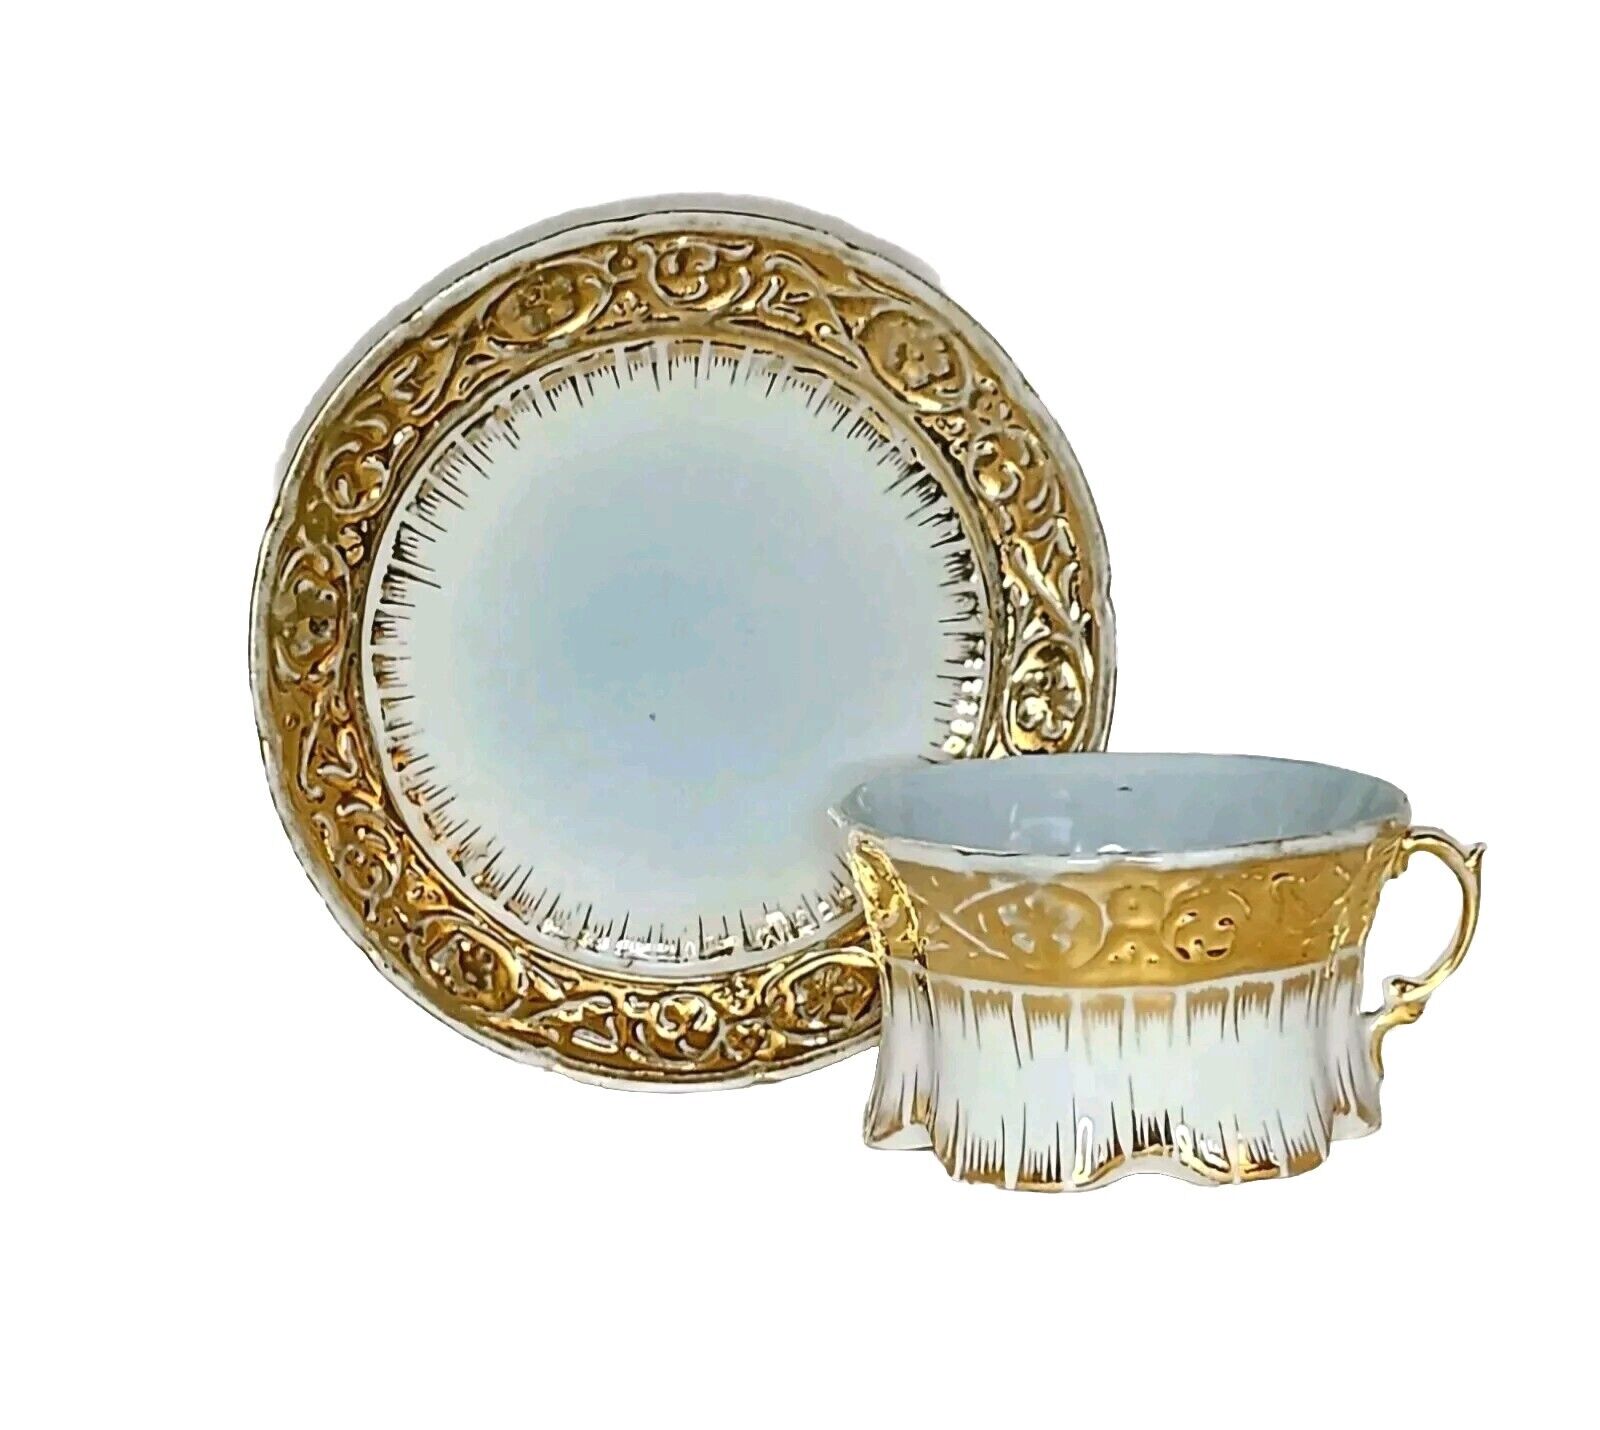 Antique Victorian Collectible Gold Gilded Blue Hue Porcelain Cup and Saucer